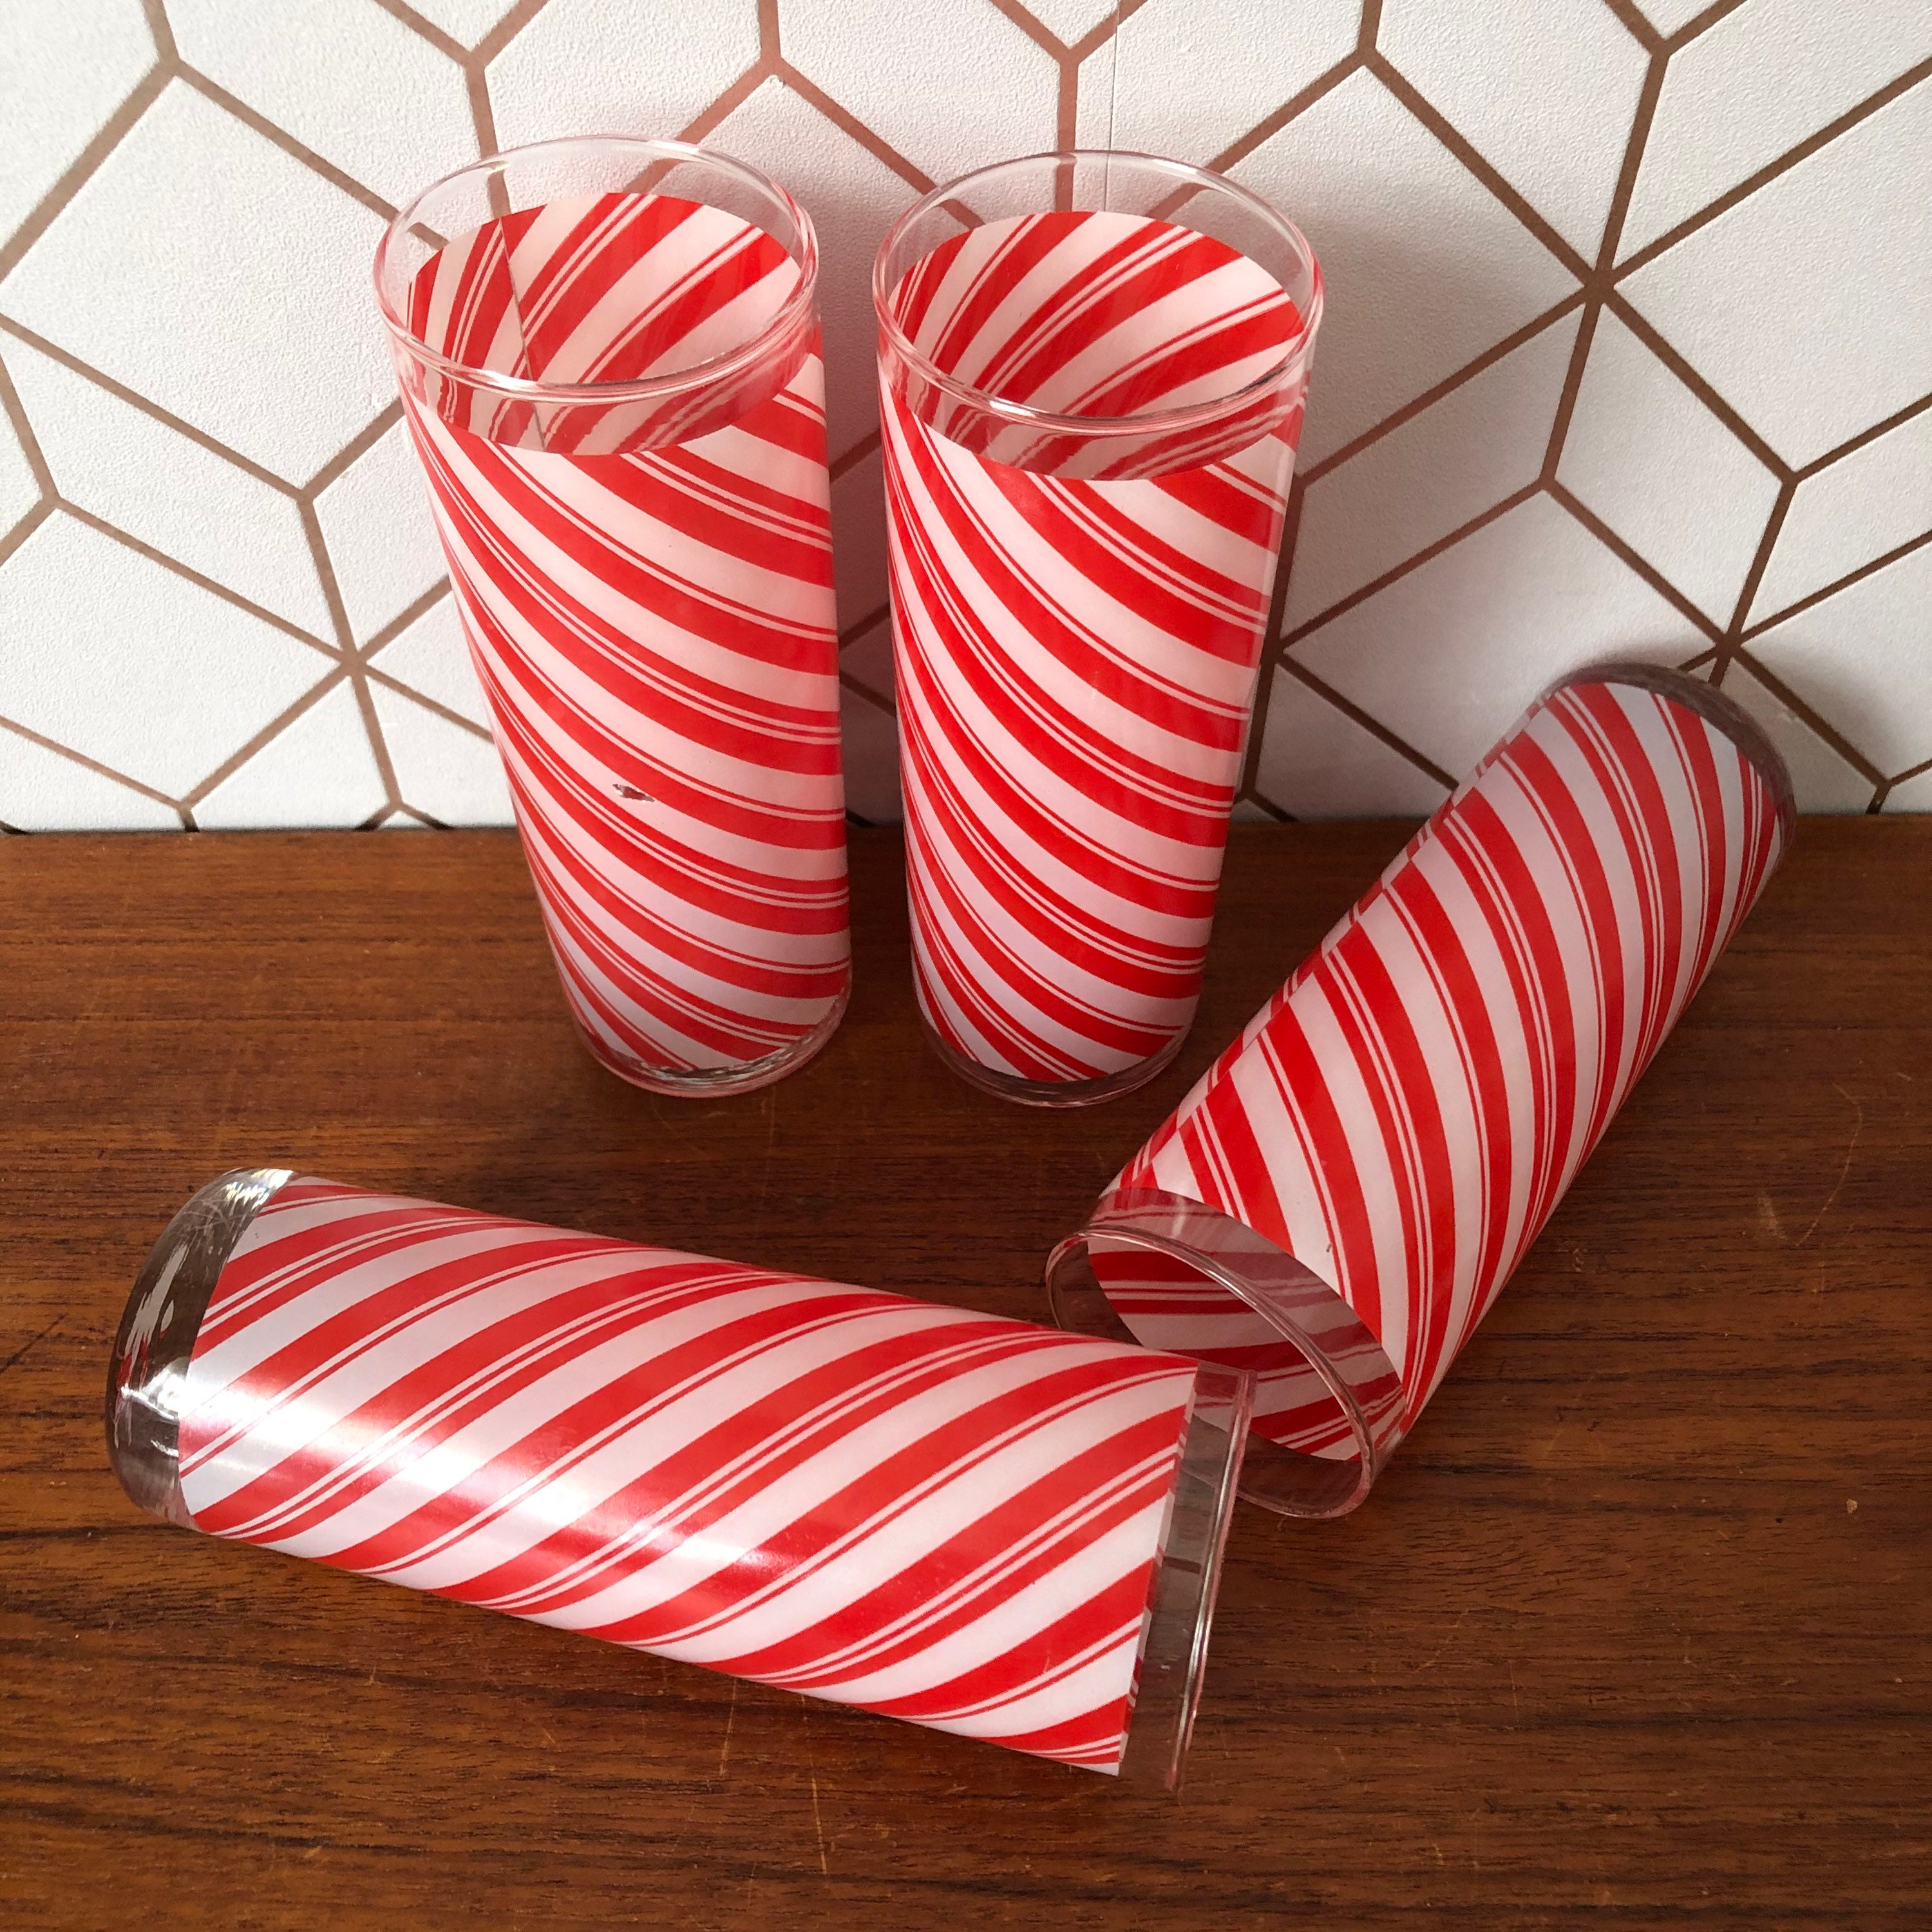 Design Focus Curly Candy Cane Straw Set 4 Red White Holiday Party Tumbler